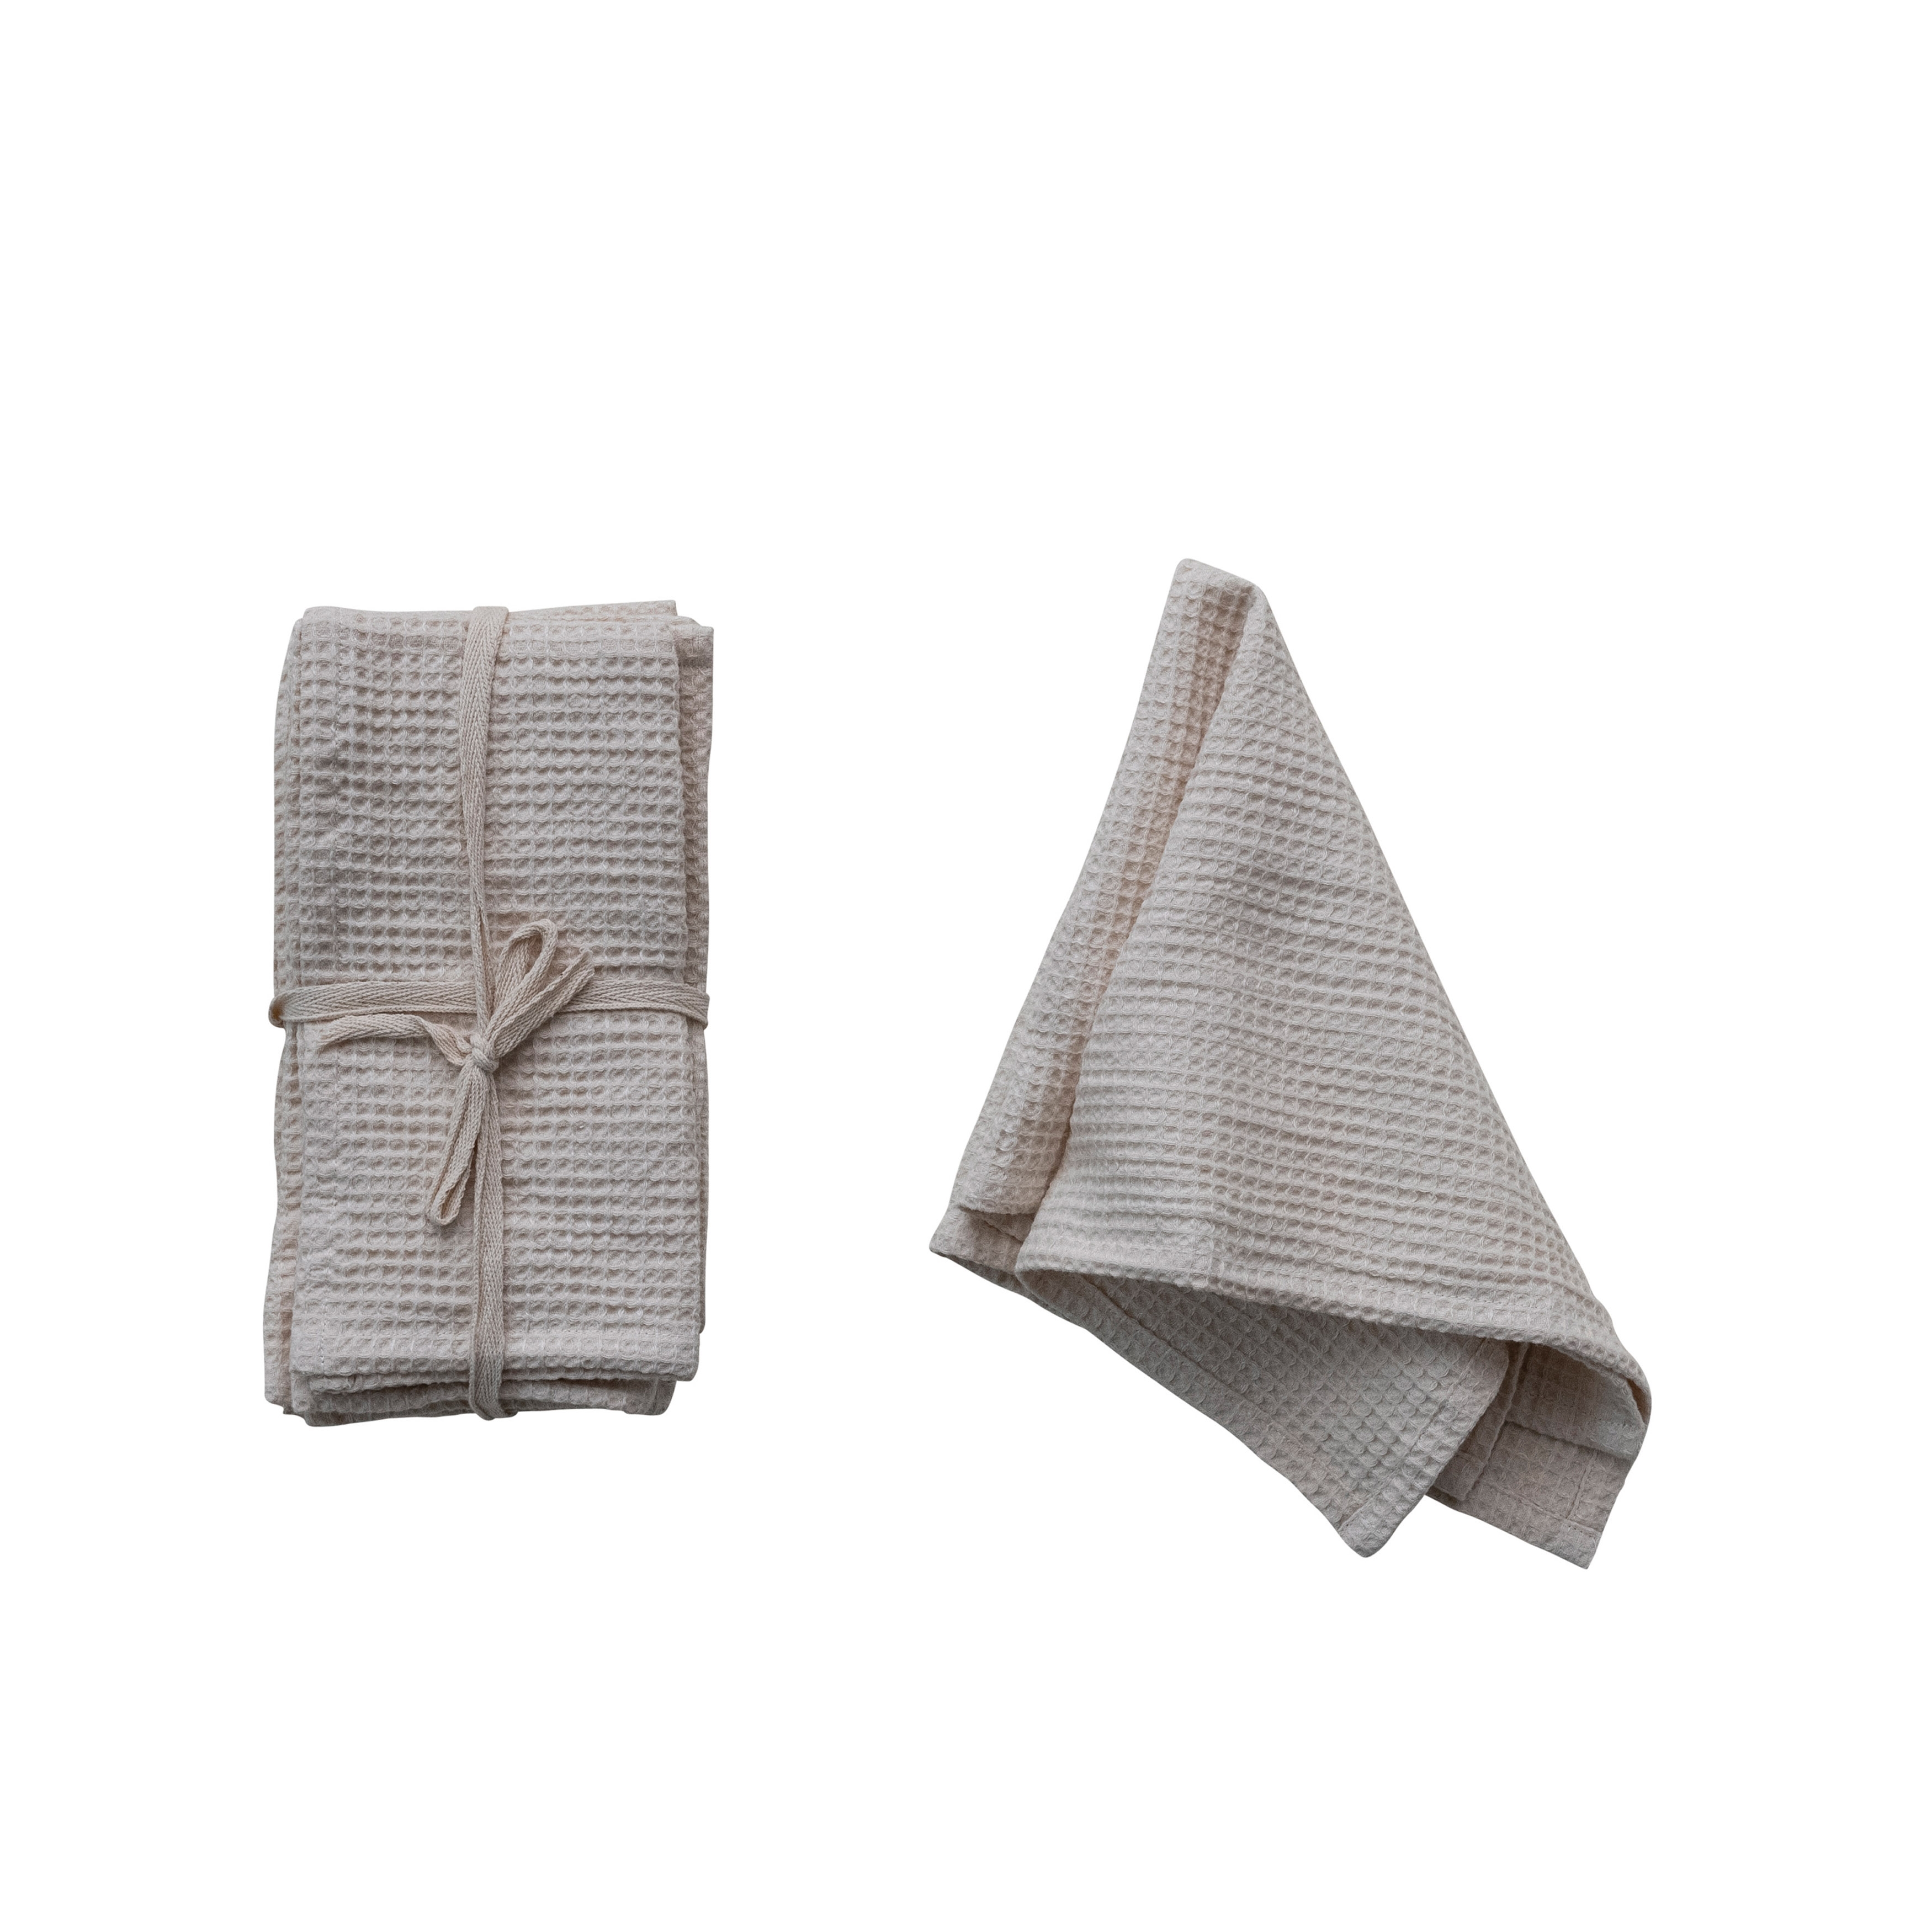 18 Inches Square Woven Linen and Cotton Waffle Dinner Napkins for Kitchen Use, Cream Color, Set of 4 - Image 0